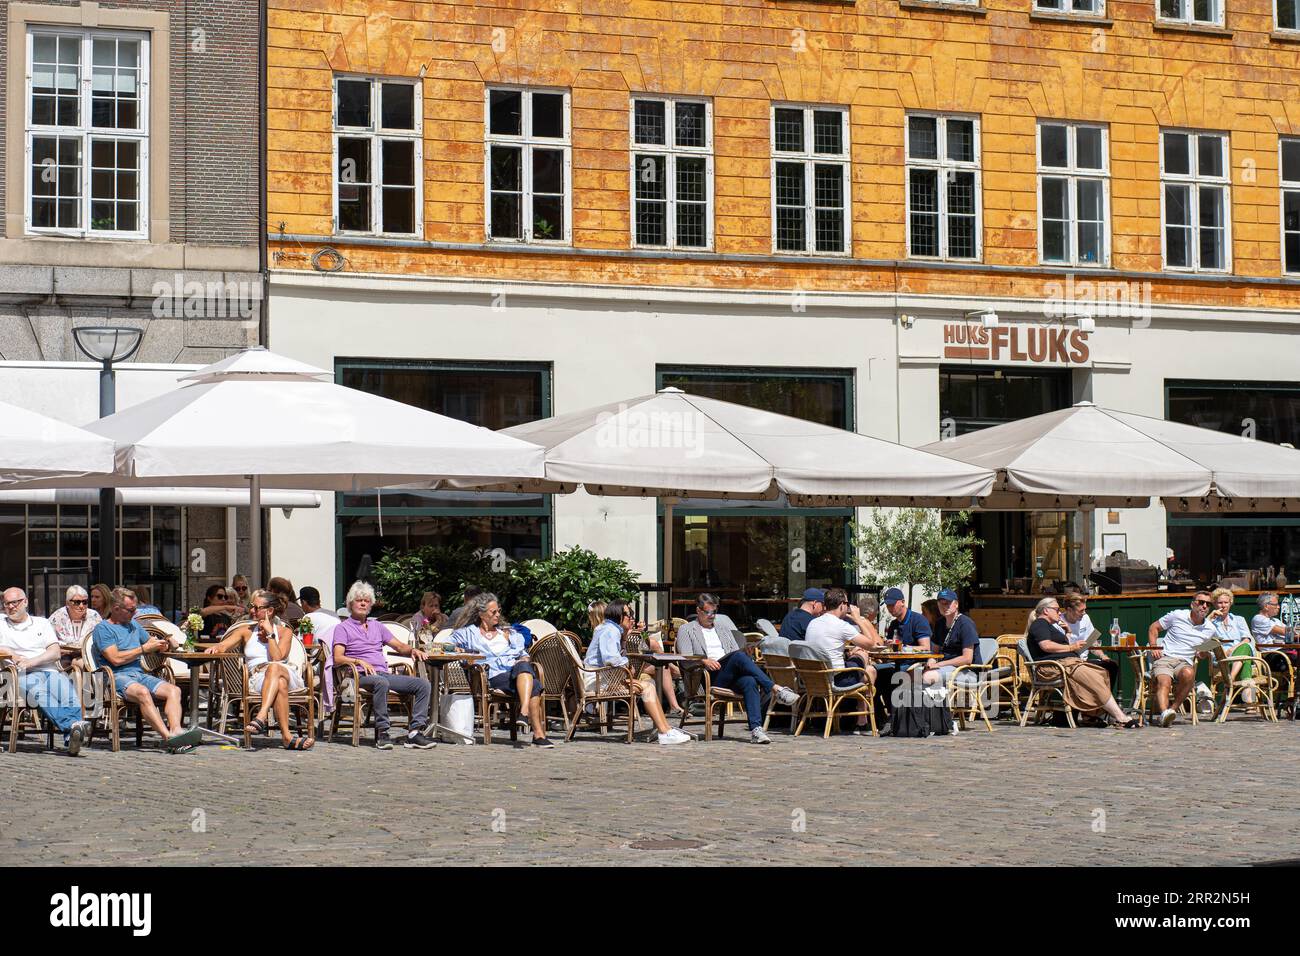 Copenhagen, Denmark, Septmeber 13, 2021: People in outdoor cafes on Gammel Torv Square in the historic city centre on a sunny day Stock Photo